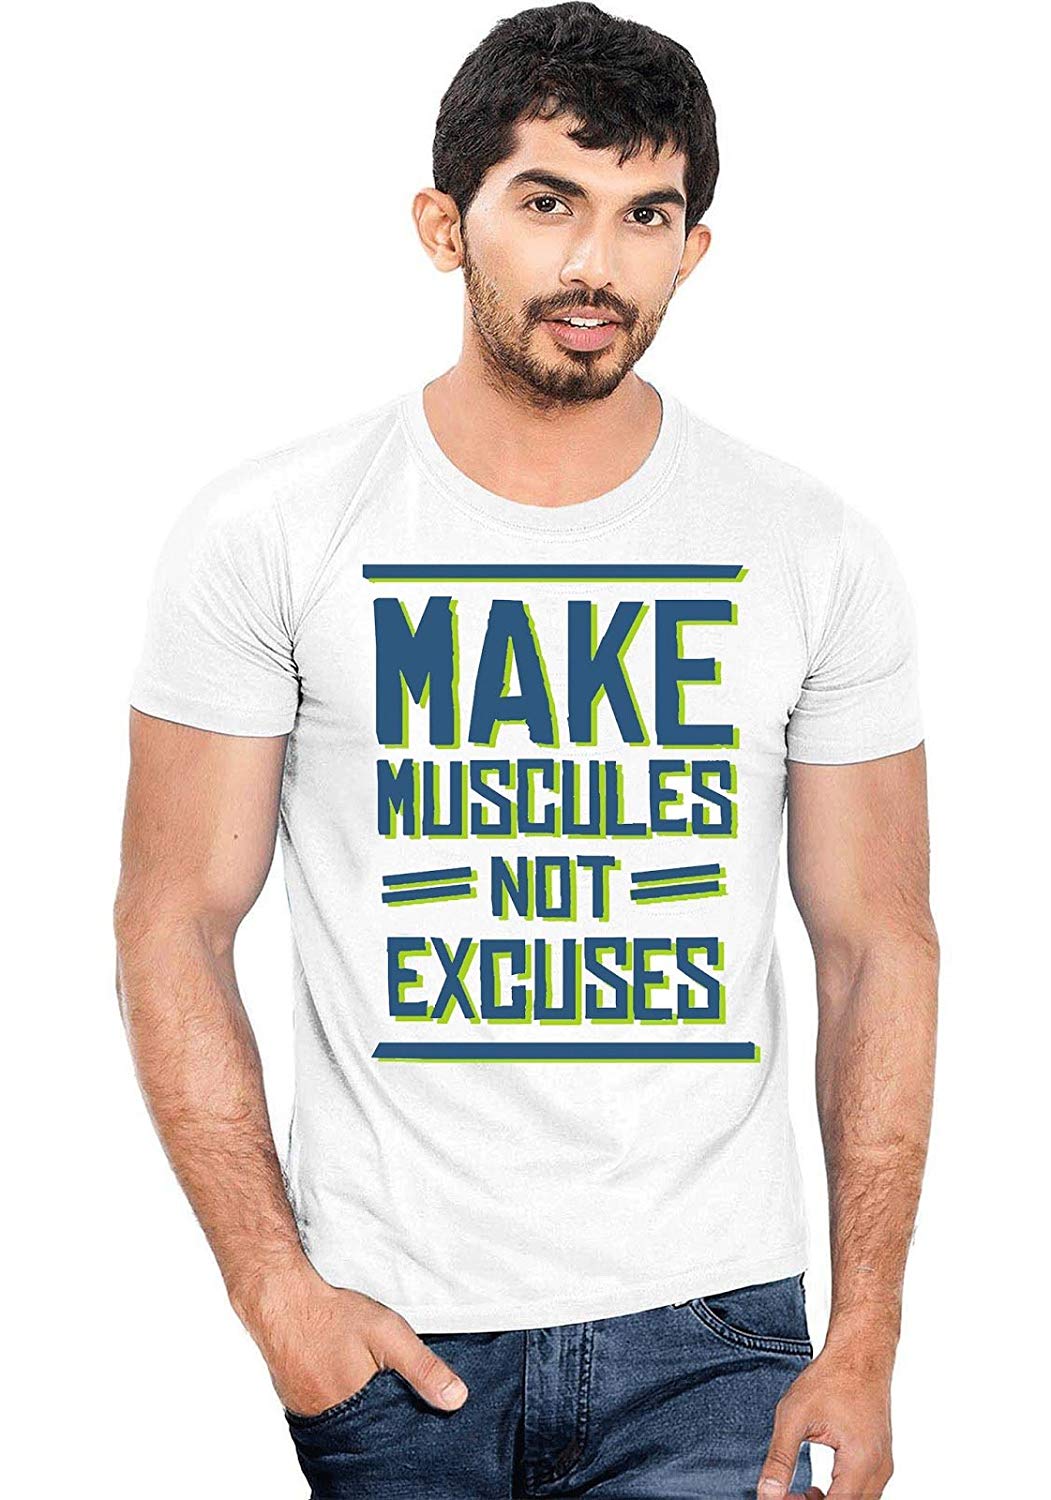 DOUBLE F ROUND NECK HALF SLEEVE WHITE COLOR MAKE MUSCULES NOT EXCUSES PRINTED T-SHIRT FOR MEN